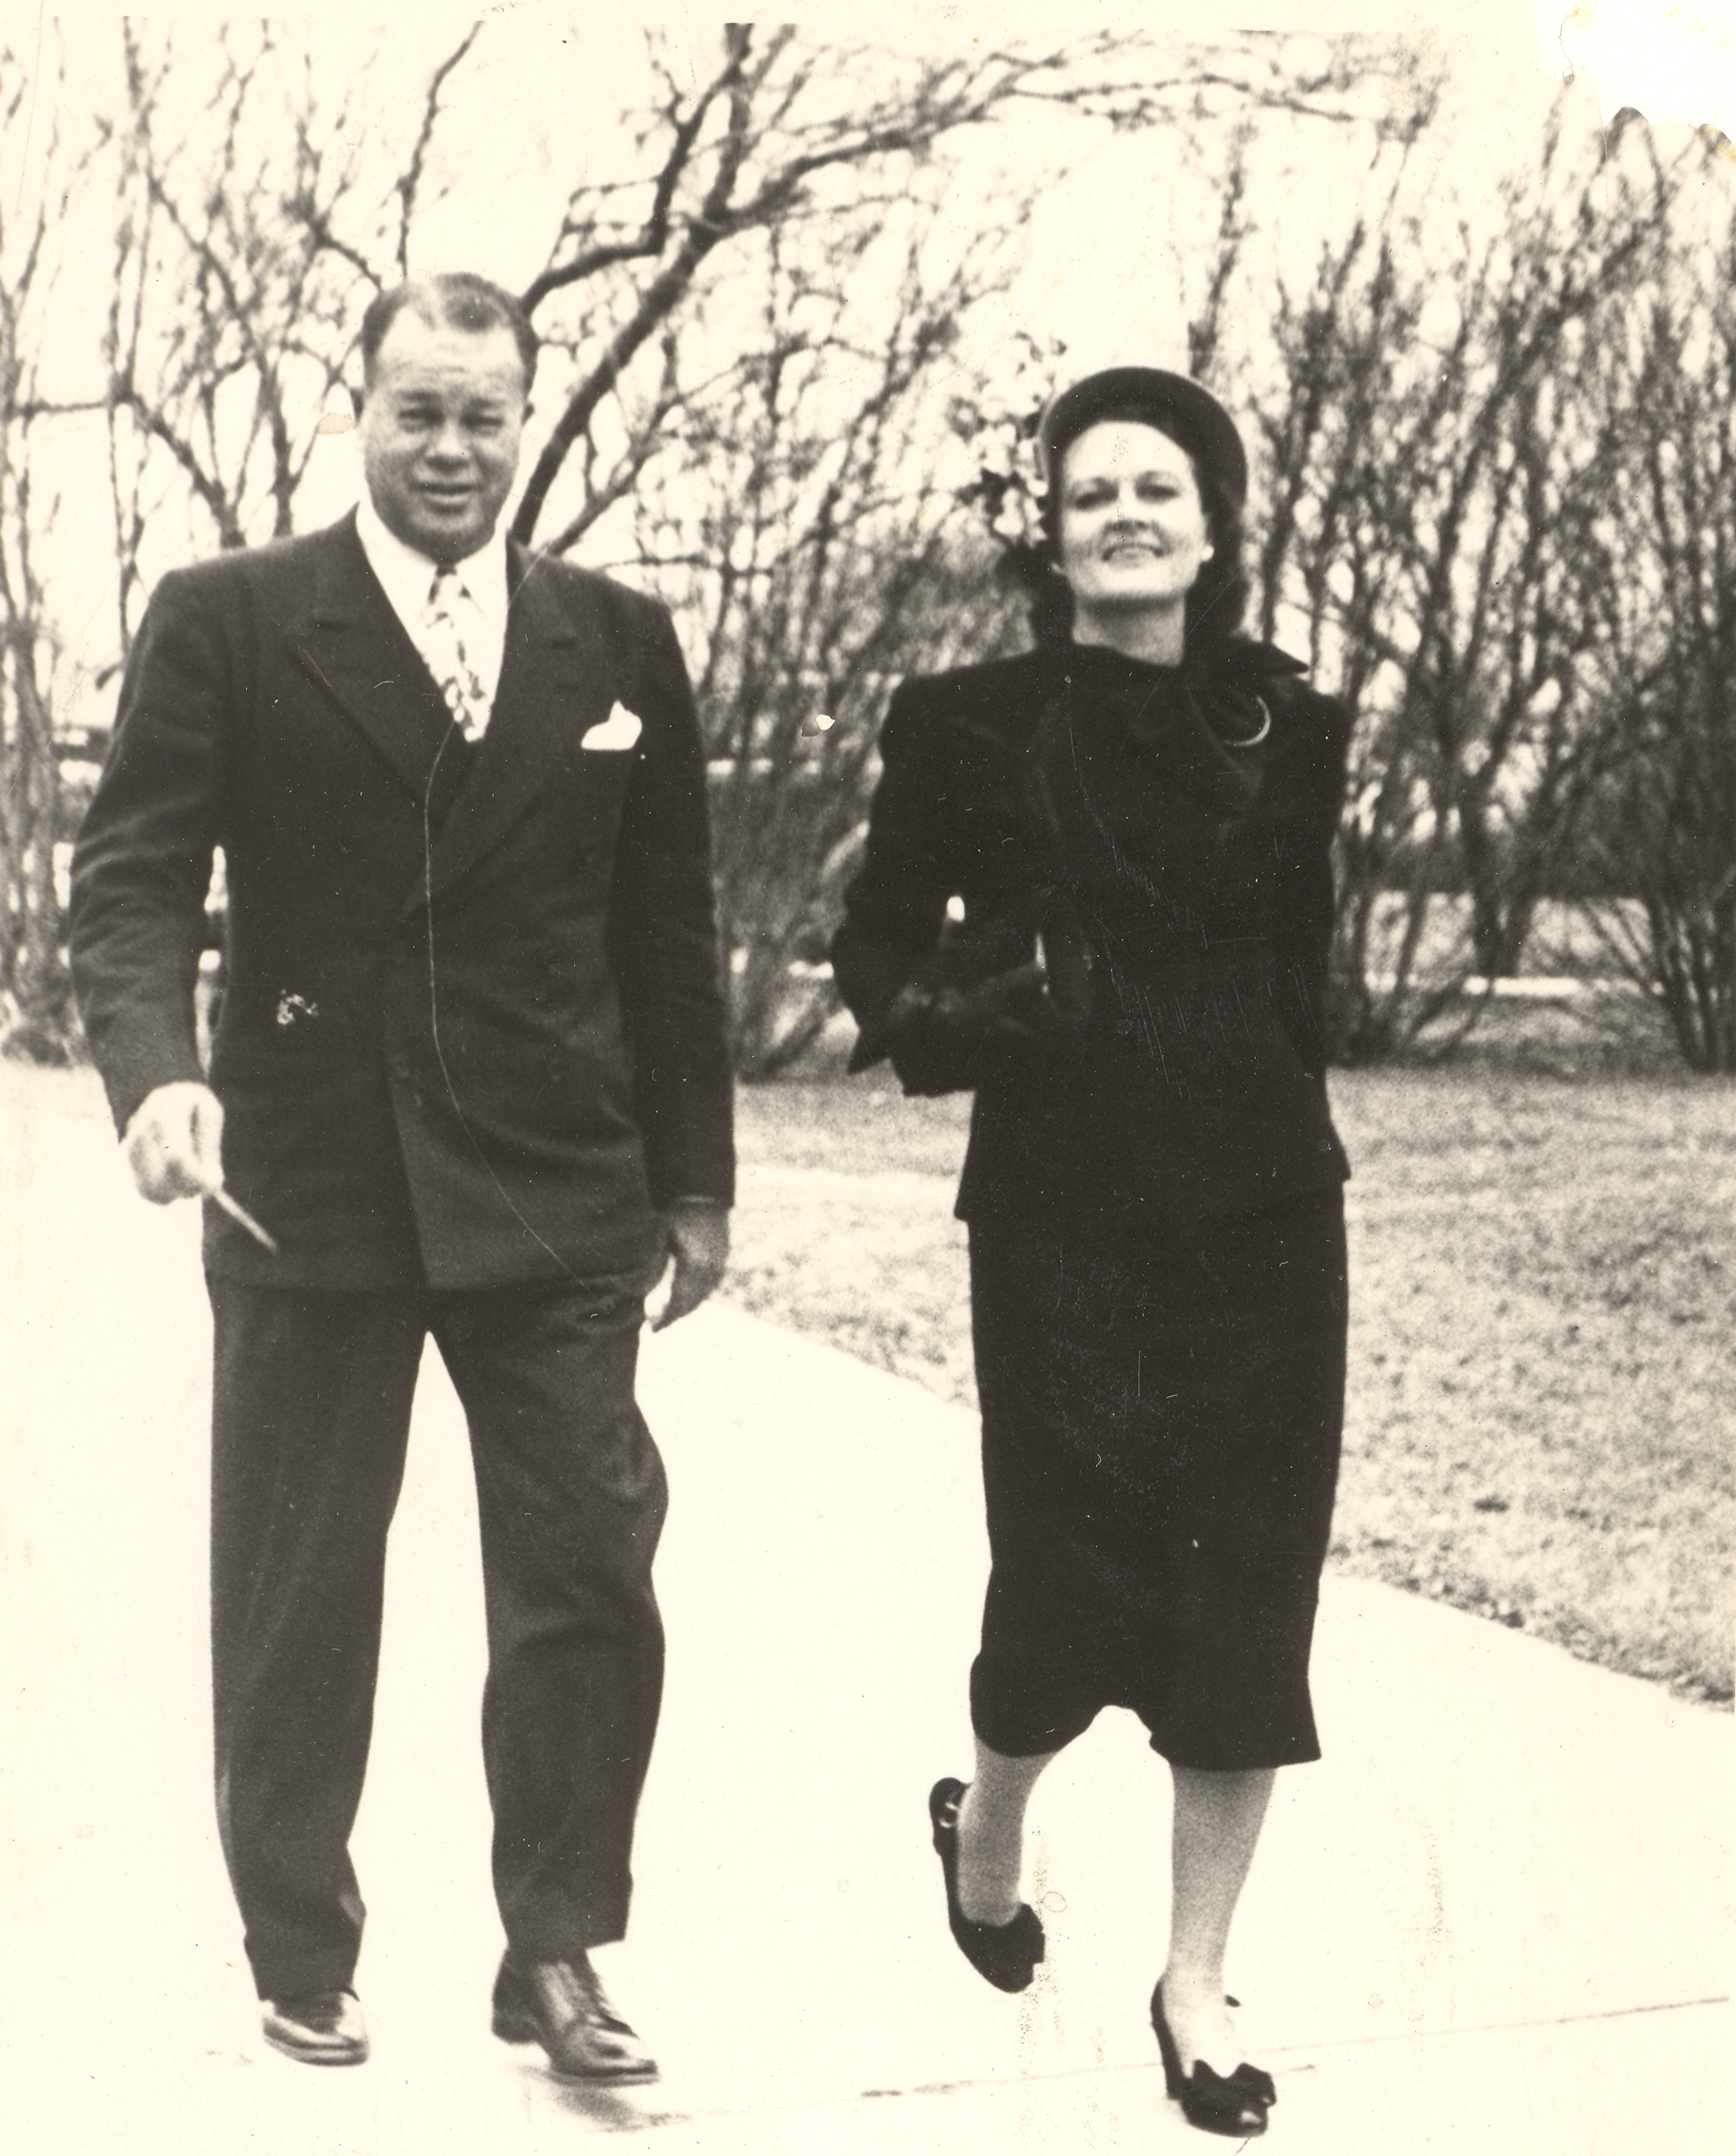 William Reilly Nail, Sr. (1903-1958) and wife Wyldon Burgess Nail (1907-1986) in Fort Worth, ca 1950s